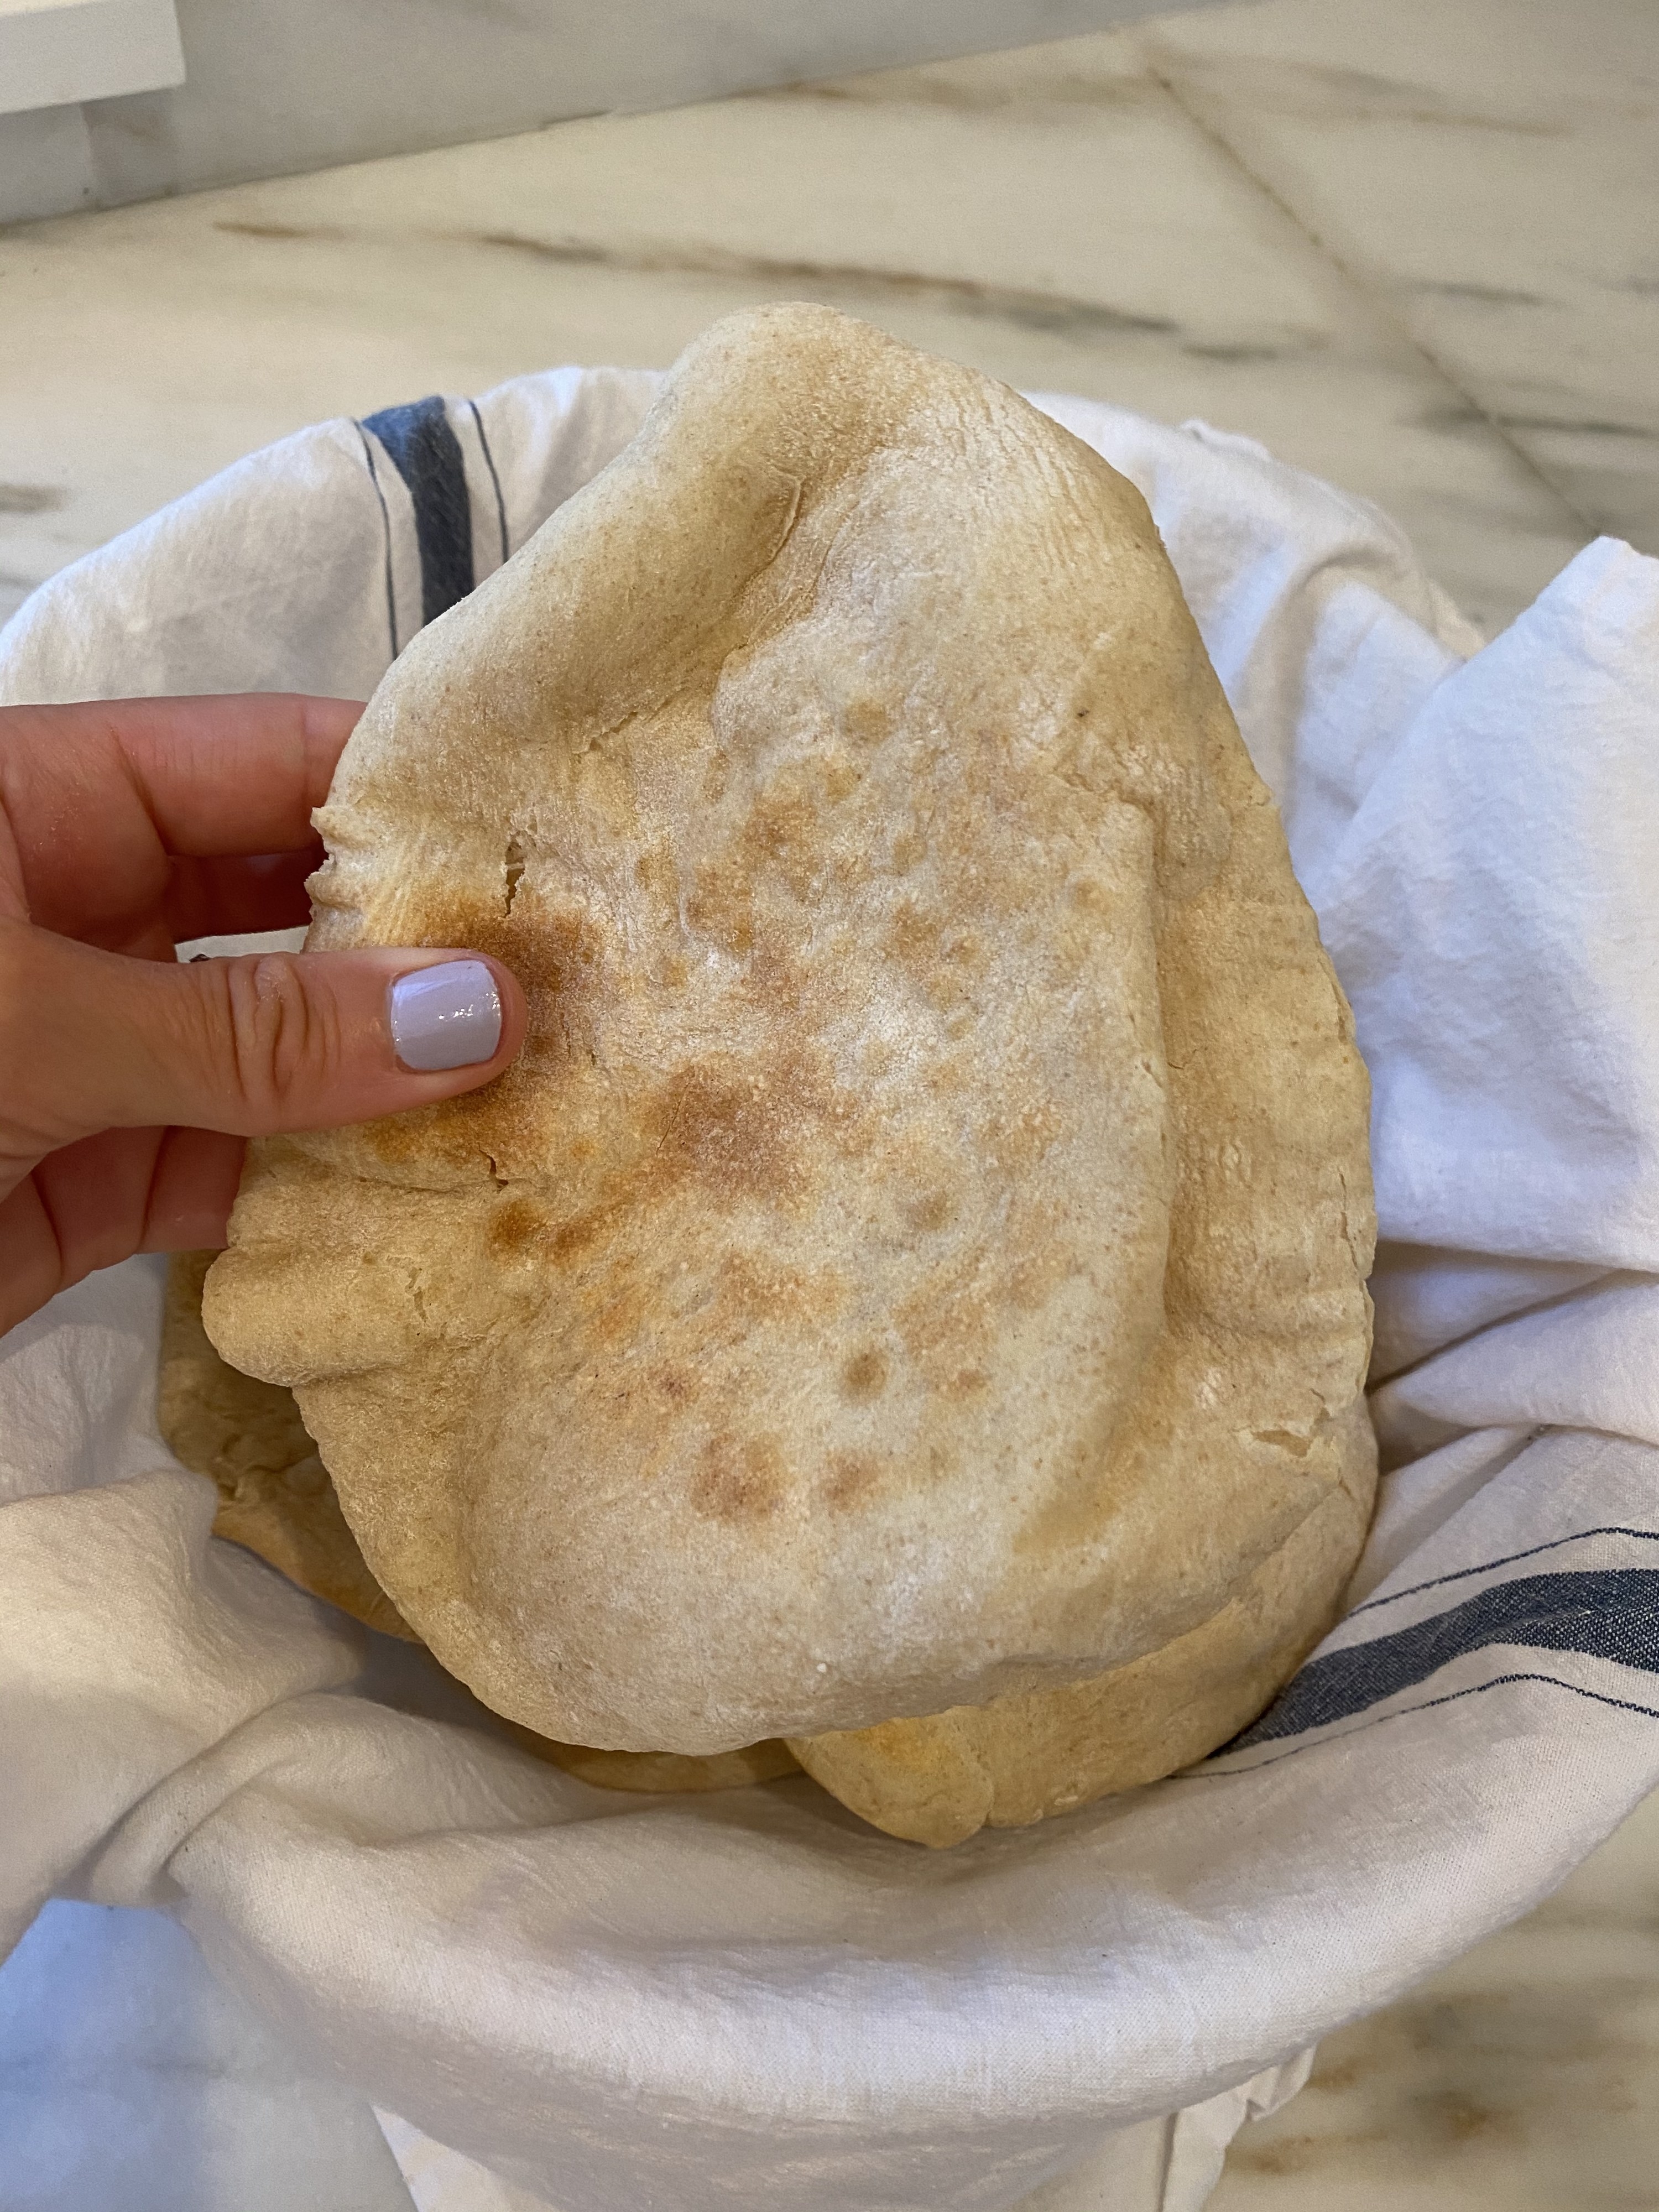 Me, holding a piece of just-baked pita bread.